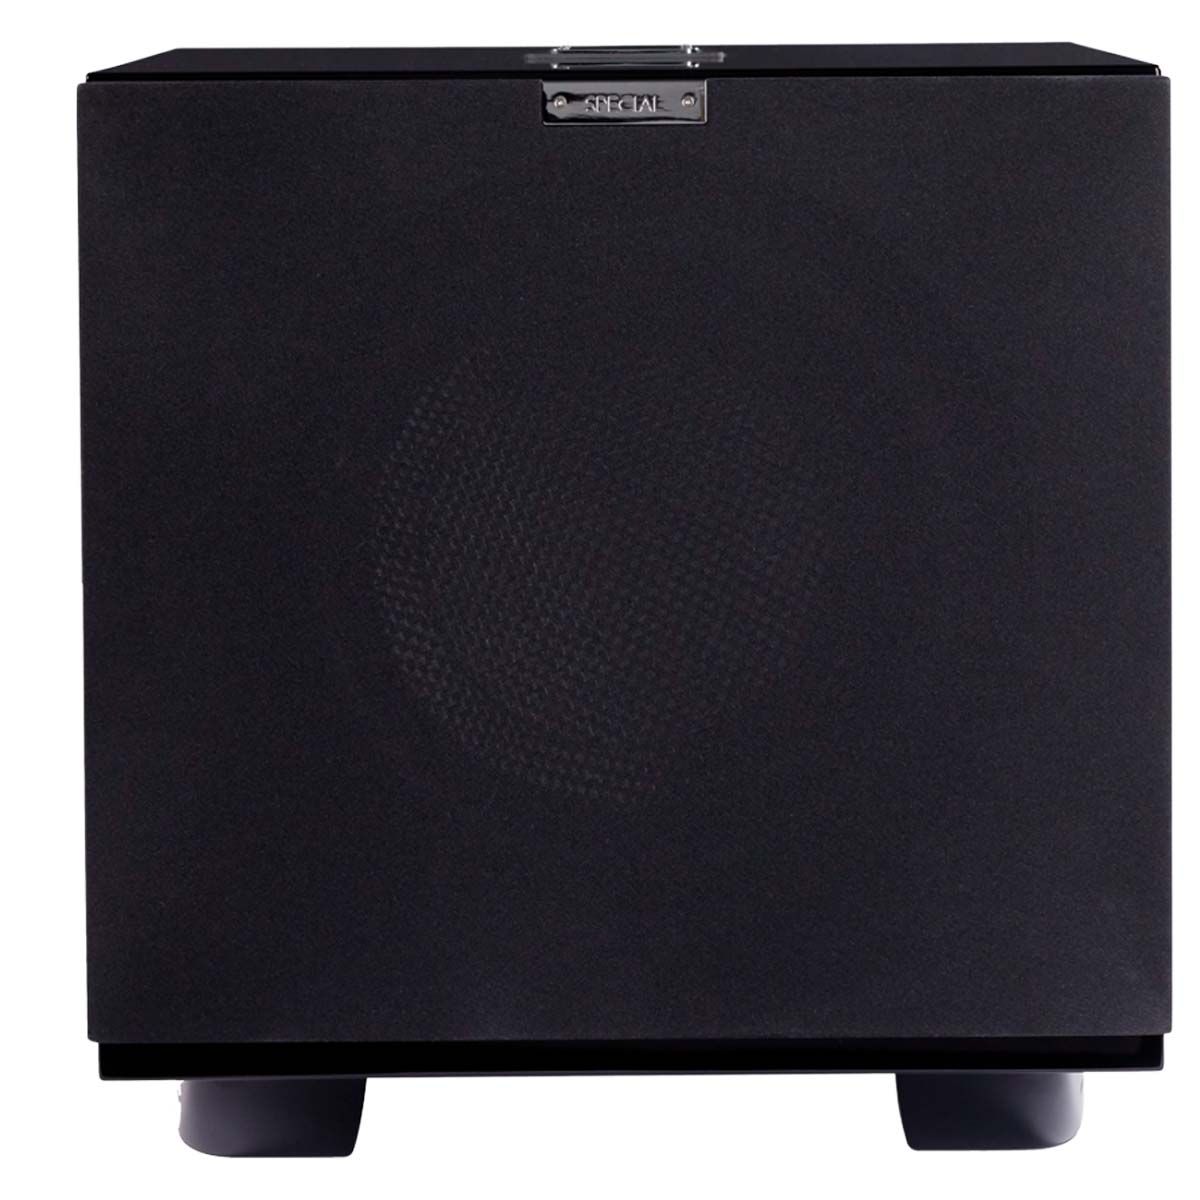 REL Serie S Carbon Special Subwoofer - Piano Black front view with grille